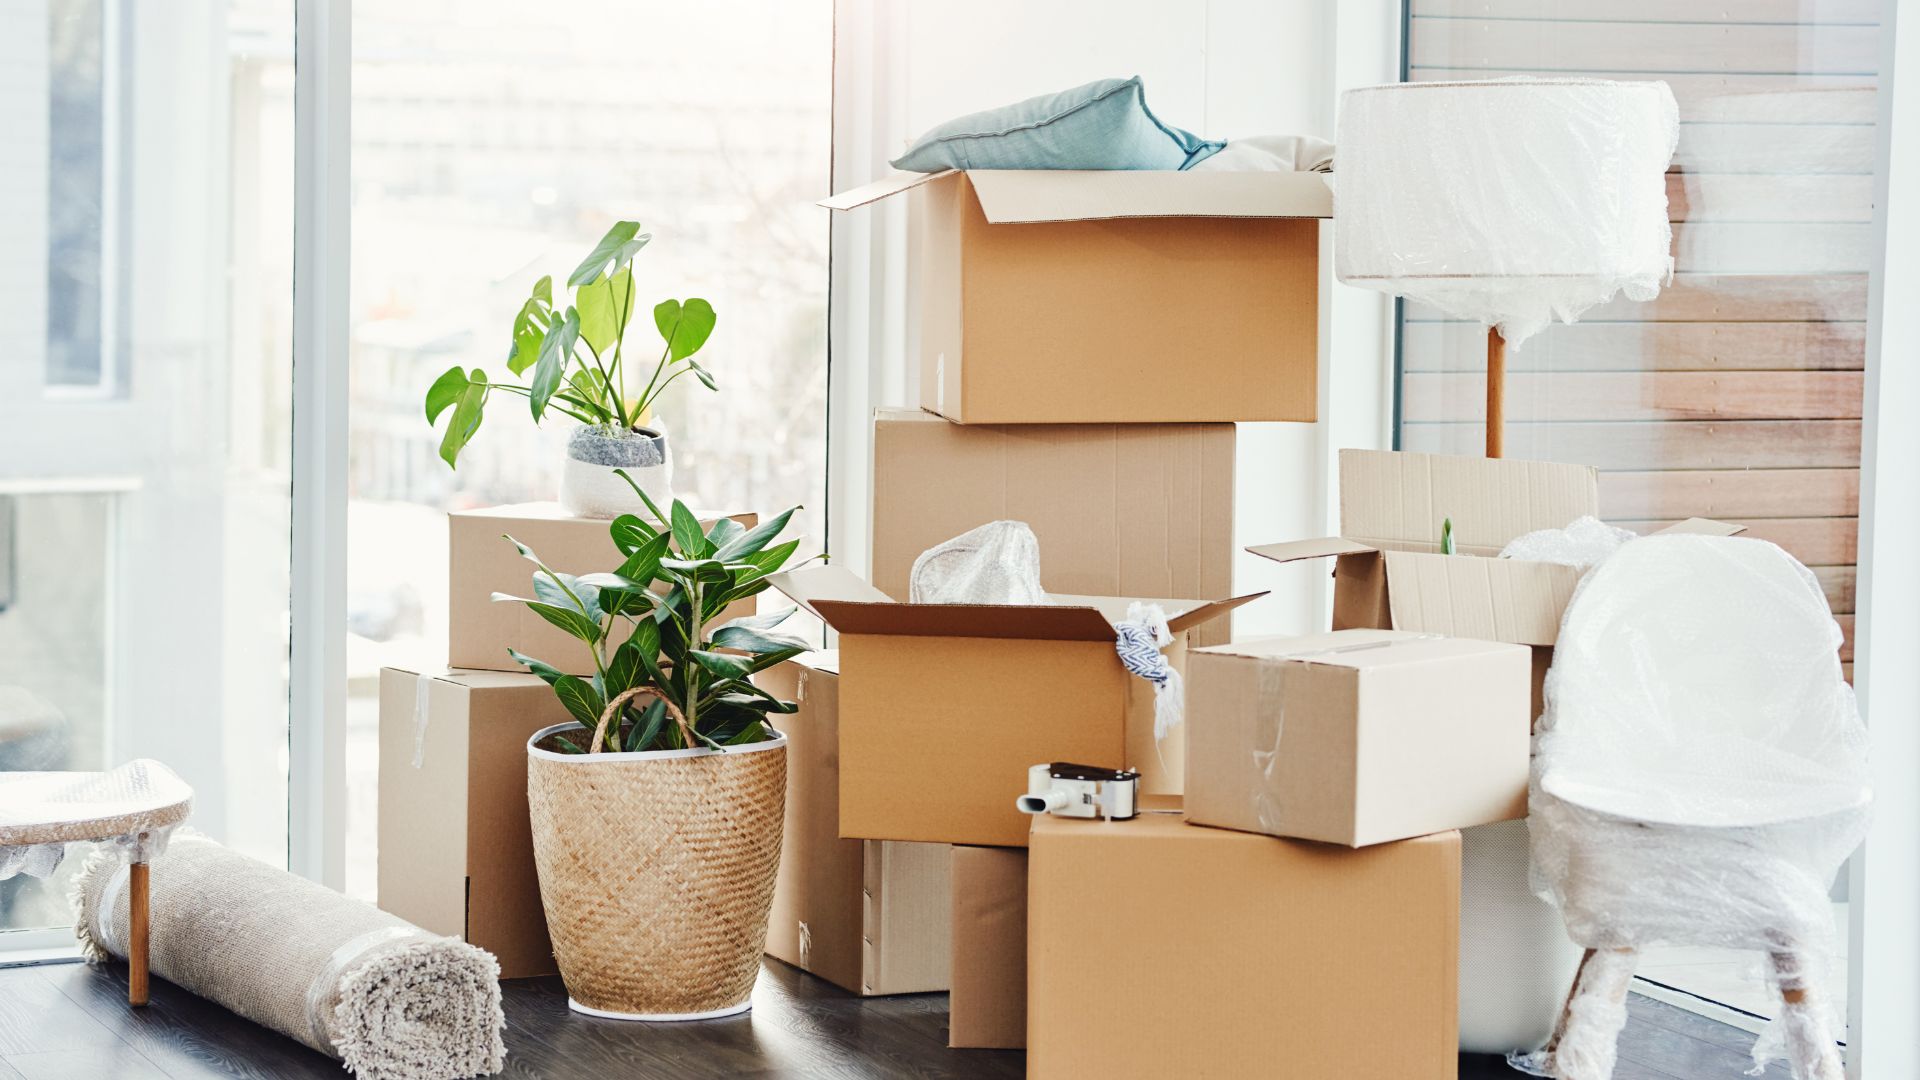 large stack of full moving boxes along with plants and furniture by the window